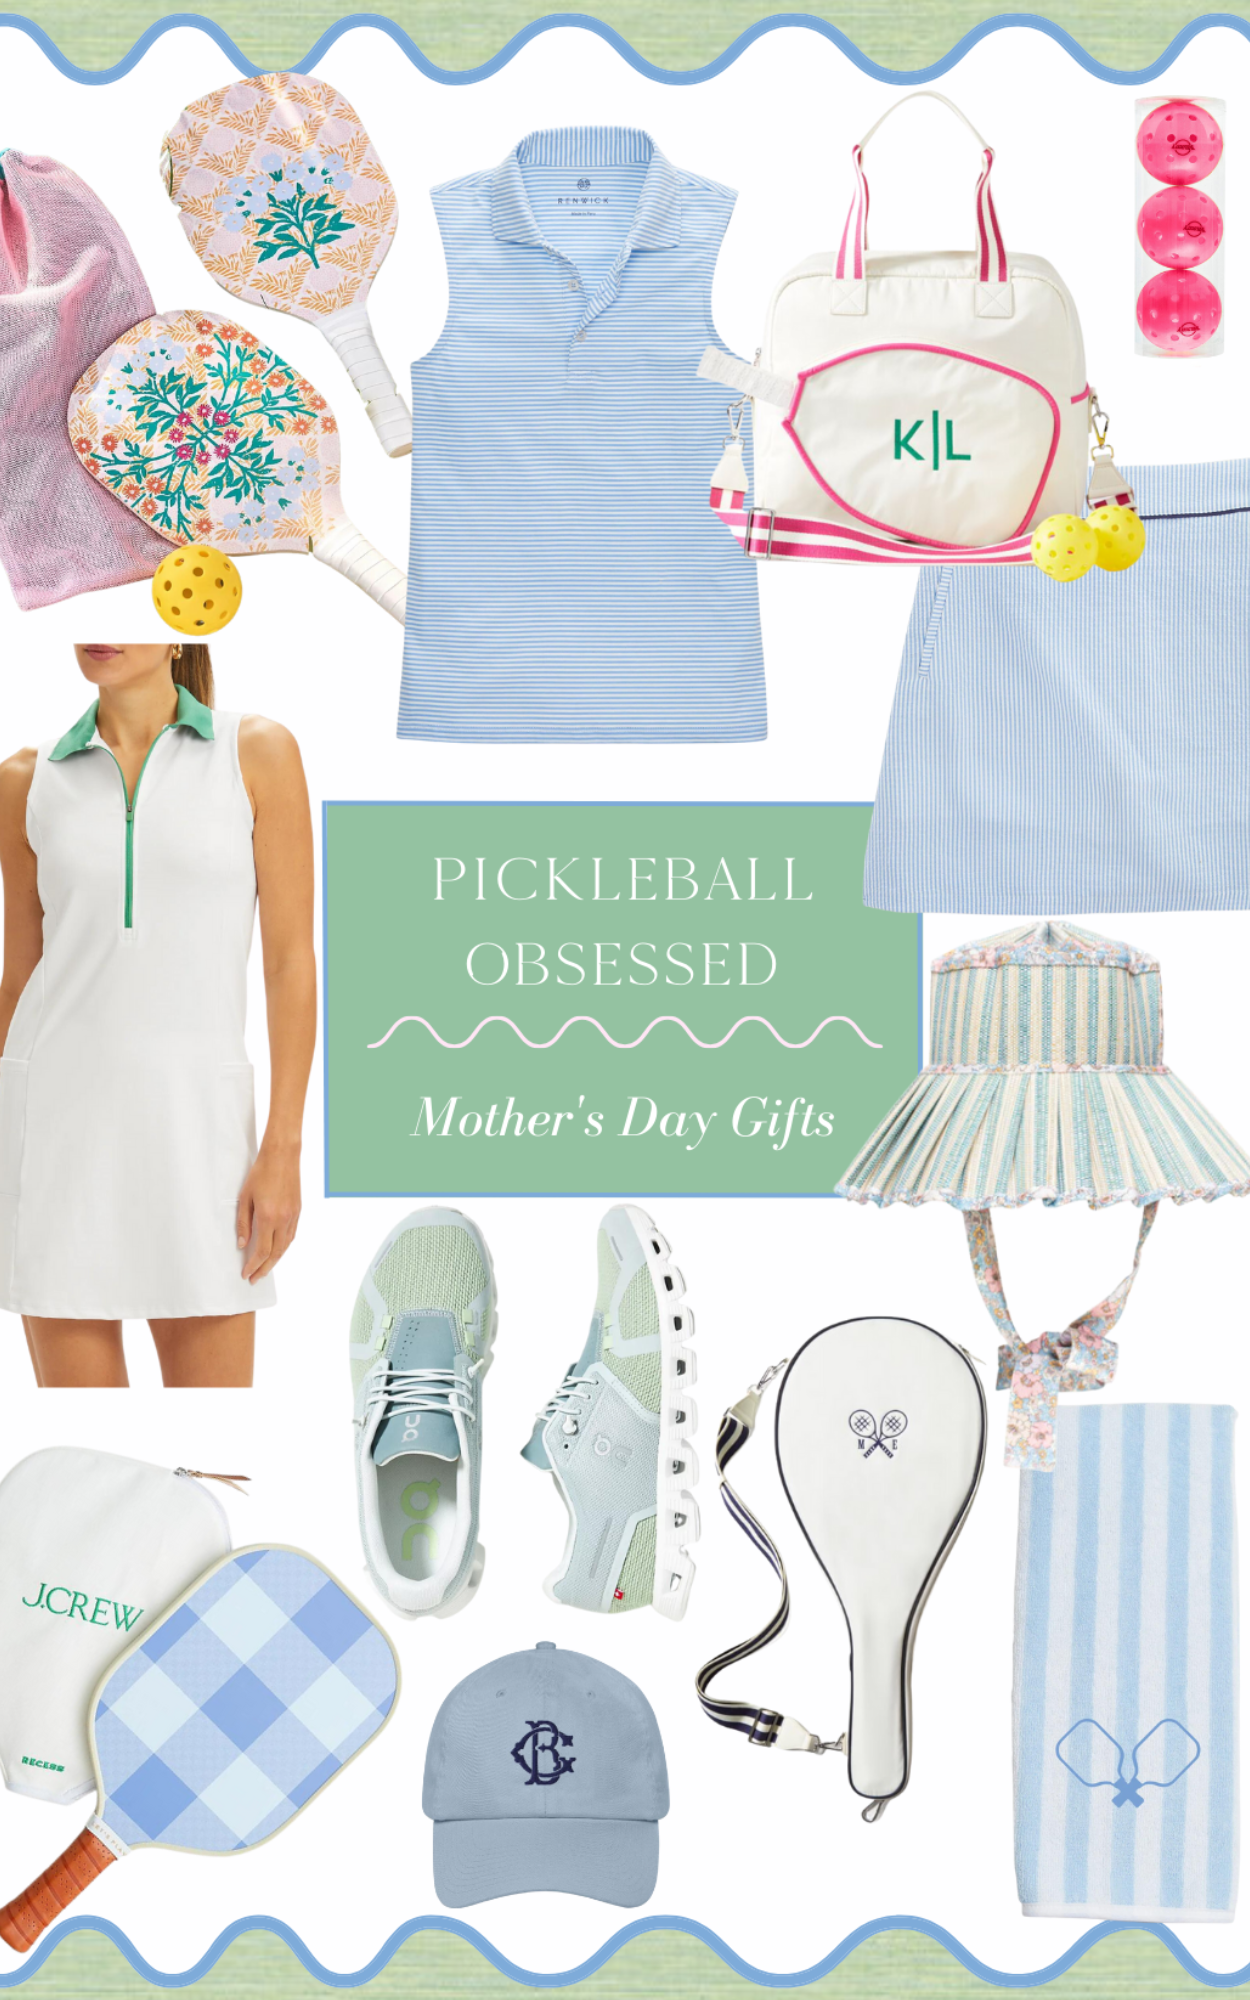 pickleball gifts, gift ideas for pickleball, tennis gifts, gifts for moms who play tennis